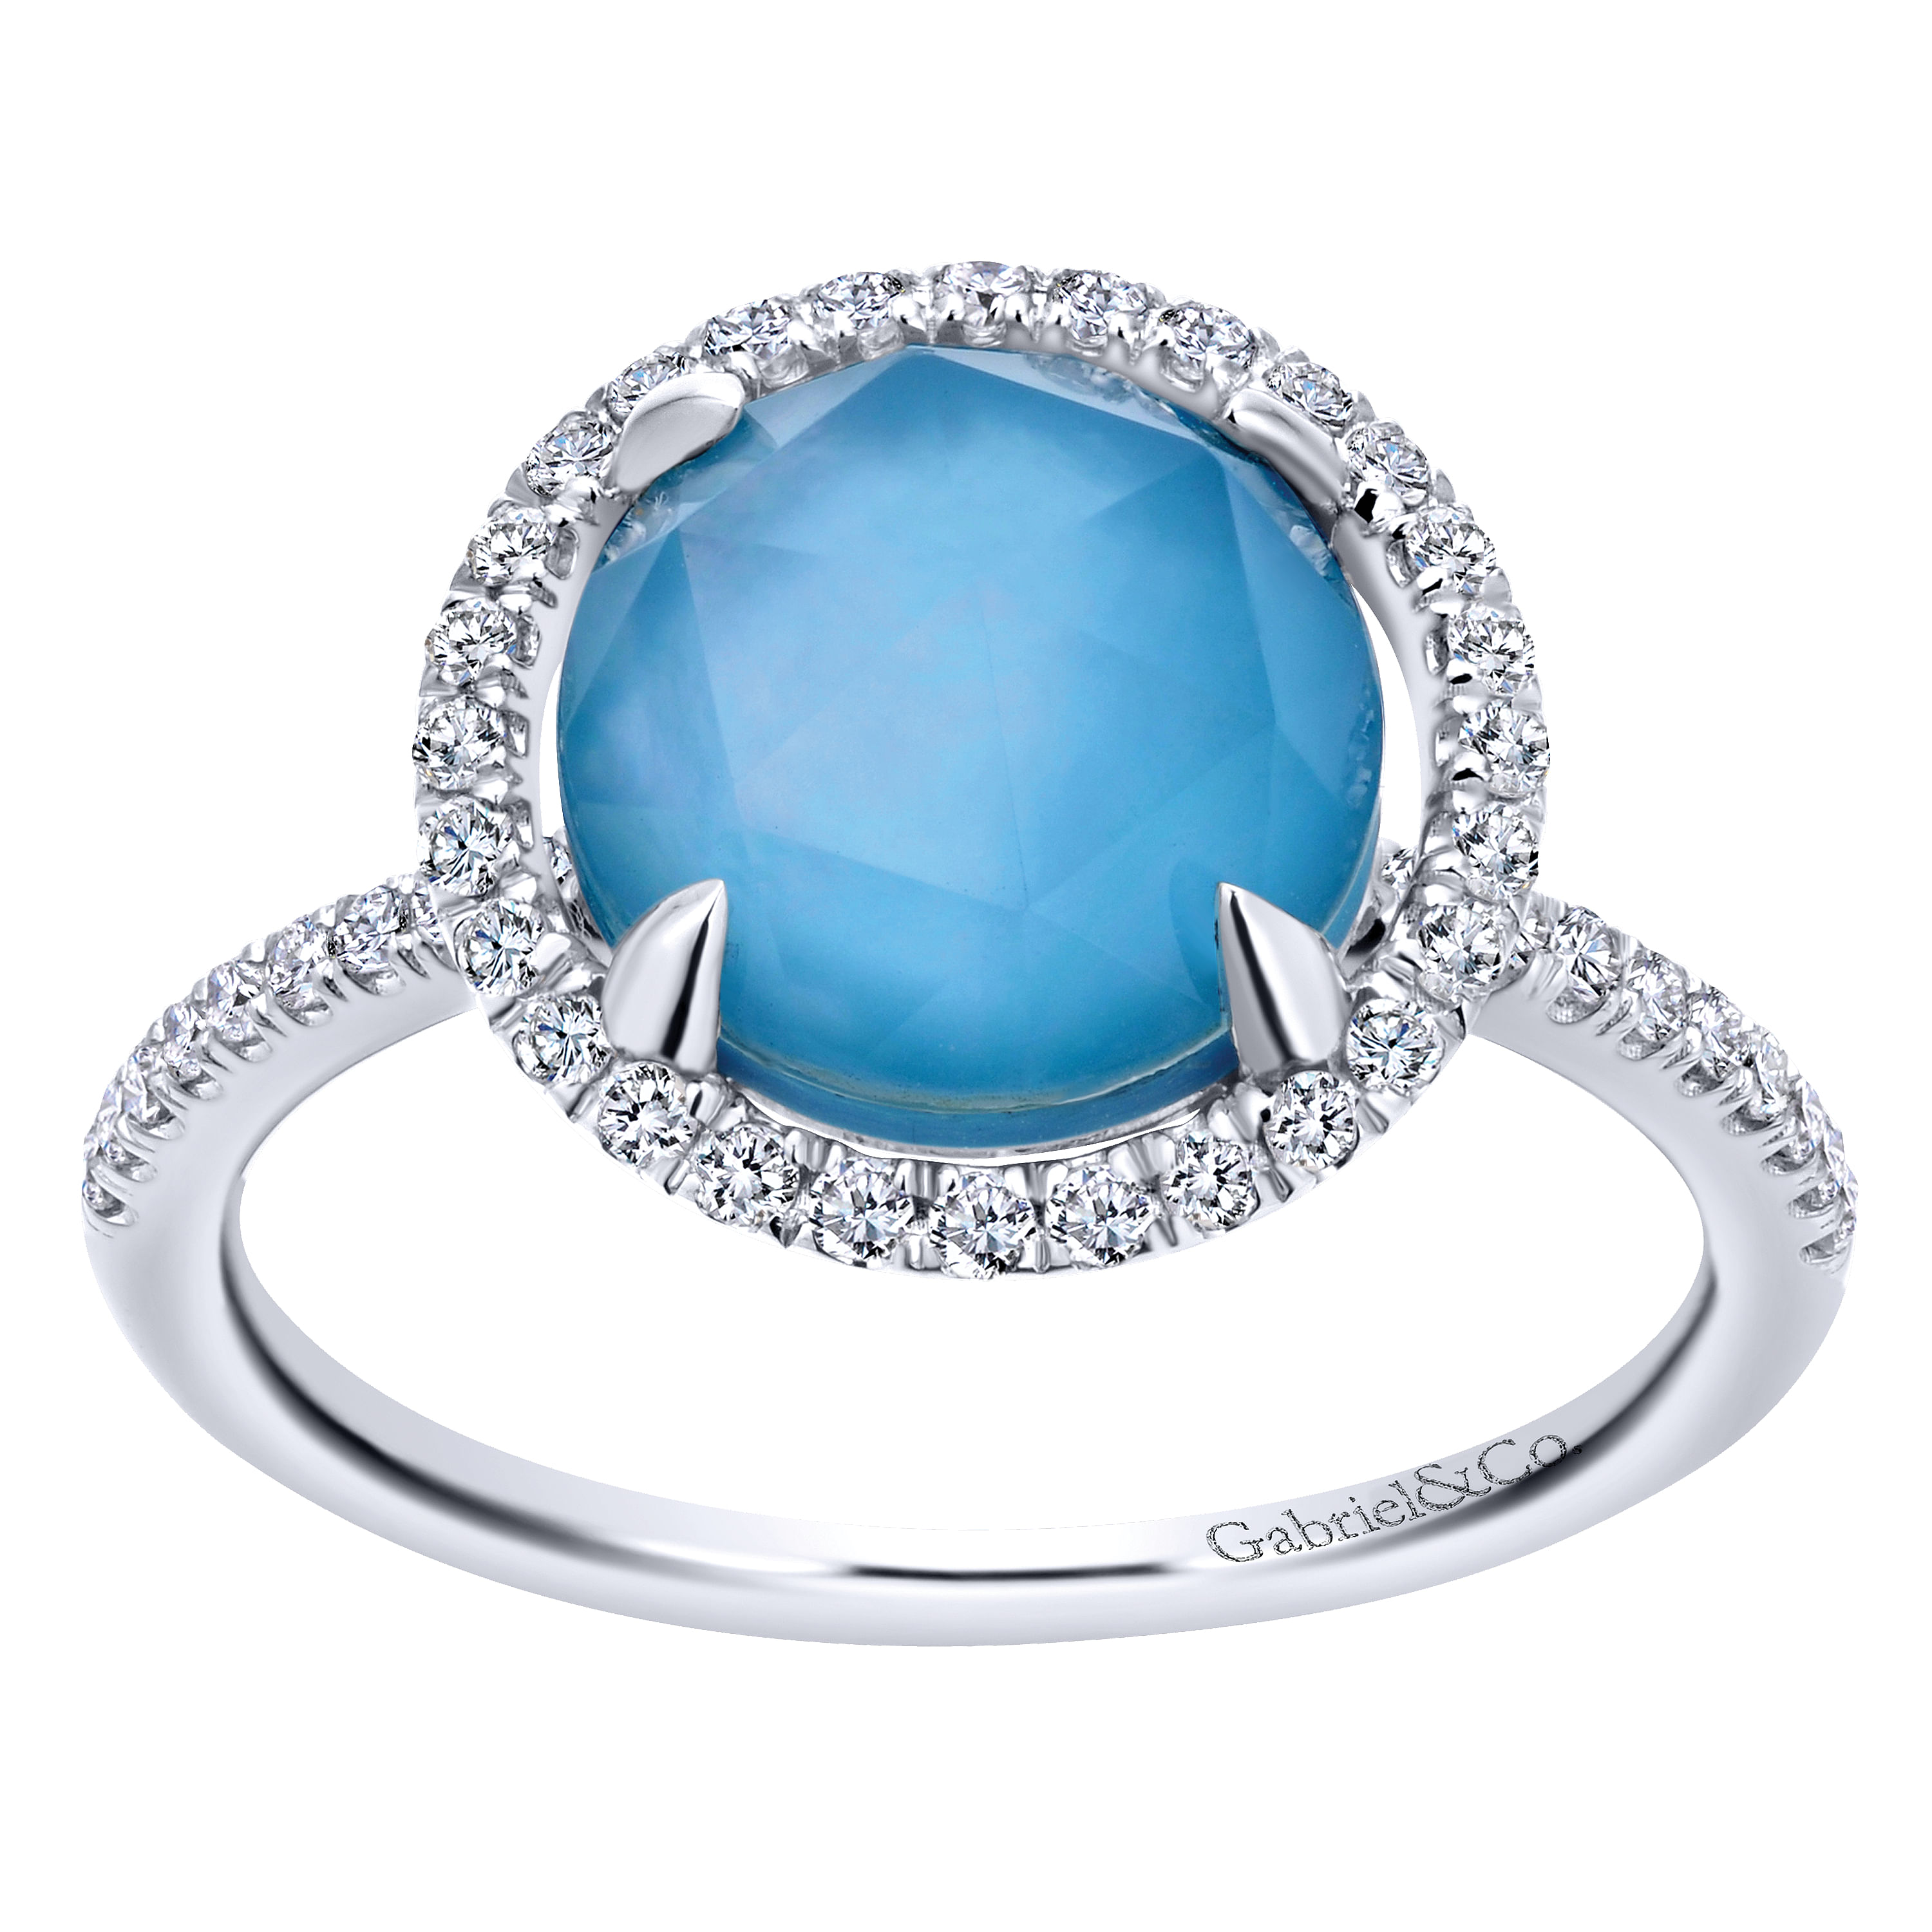 14k White Gold Classic Rock Crystal, White MOP & Turquoise Ring